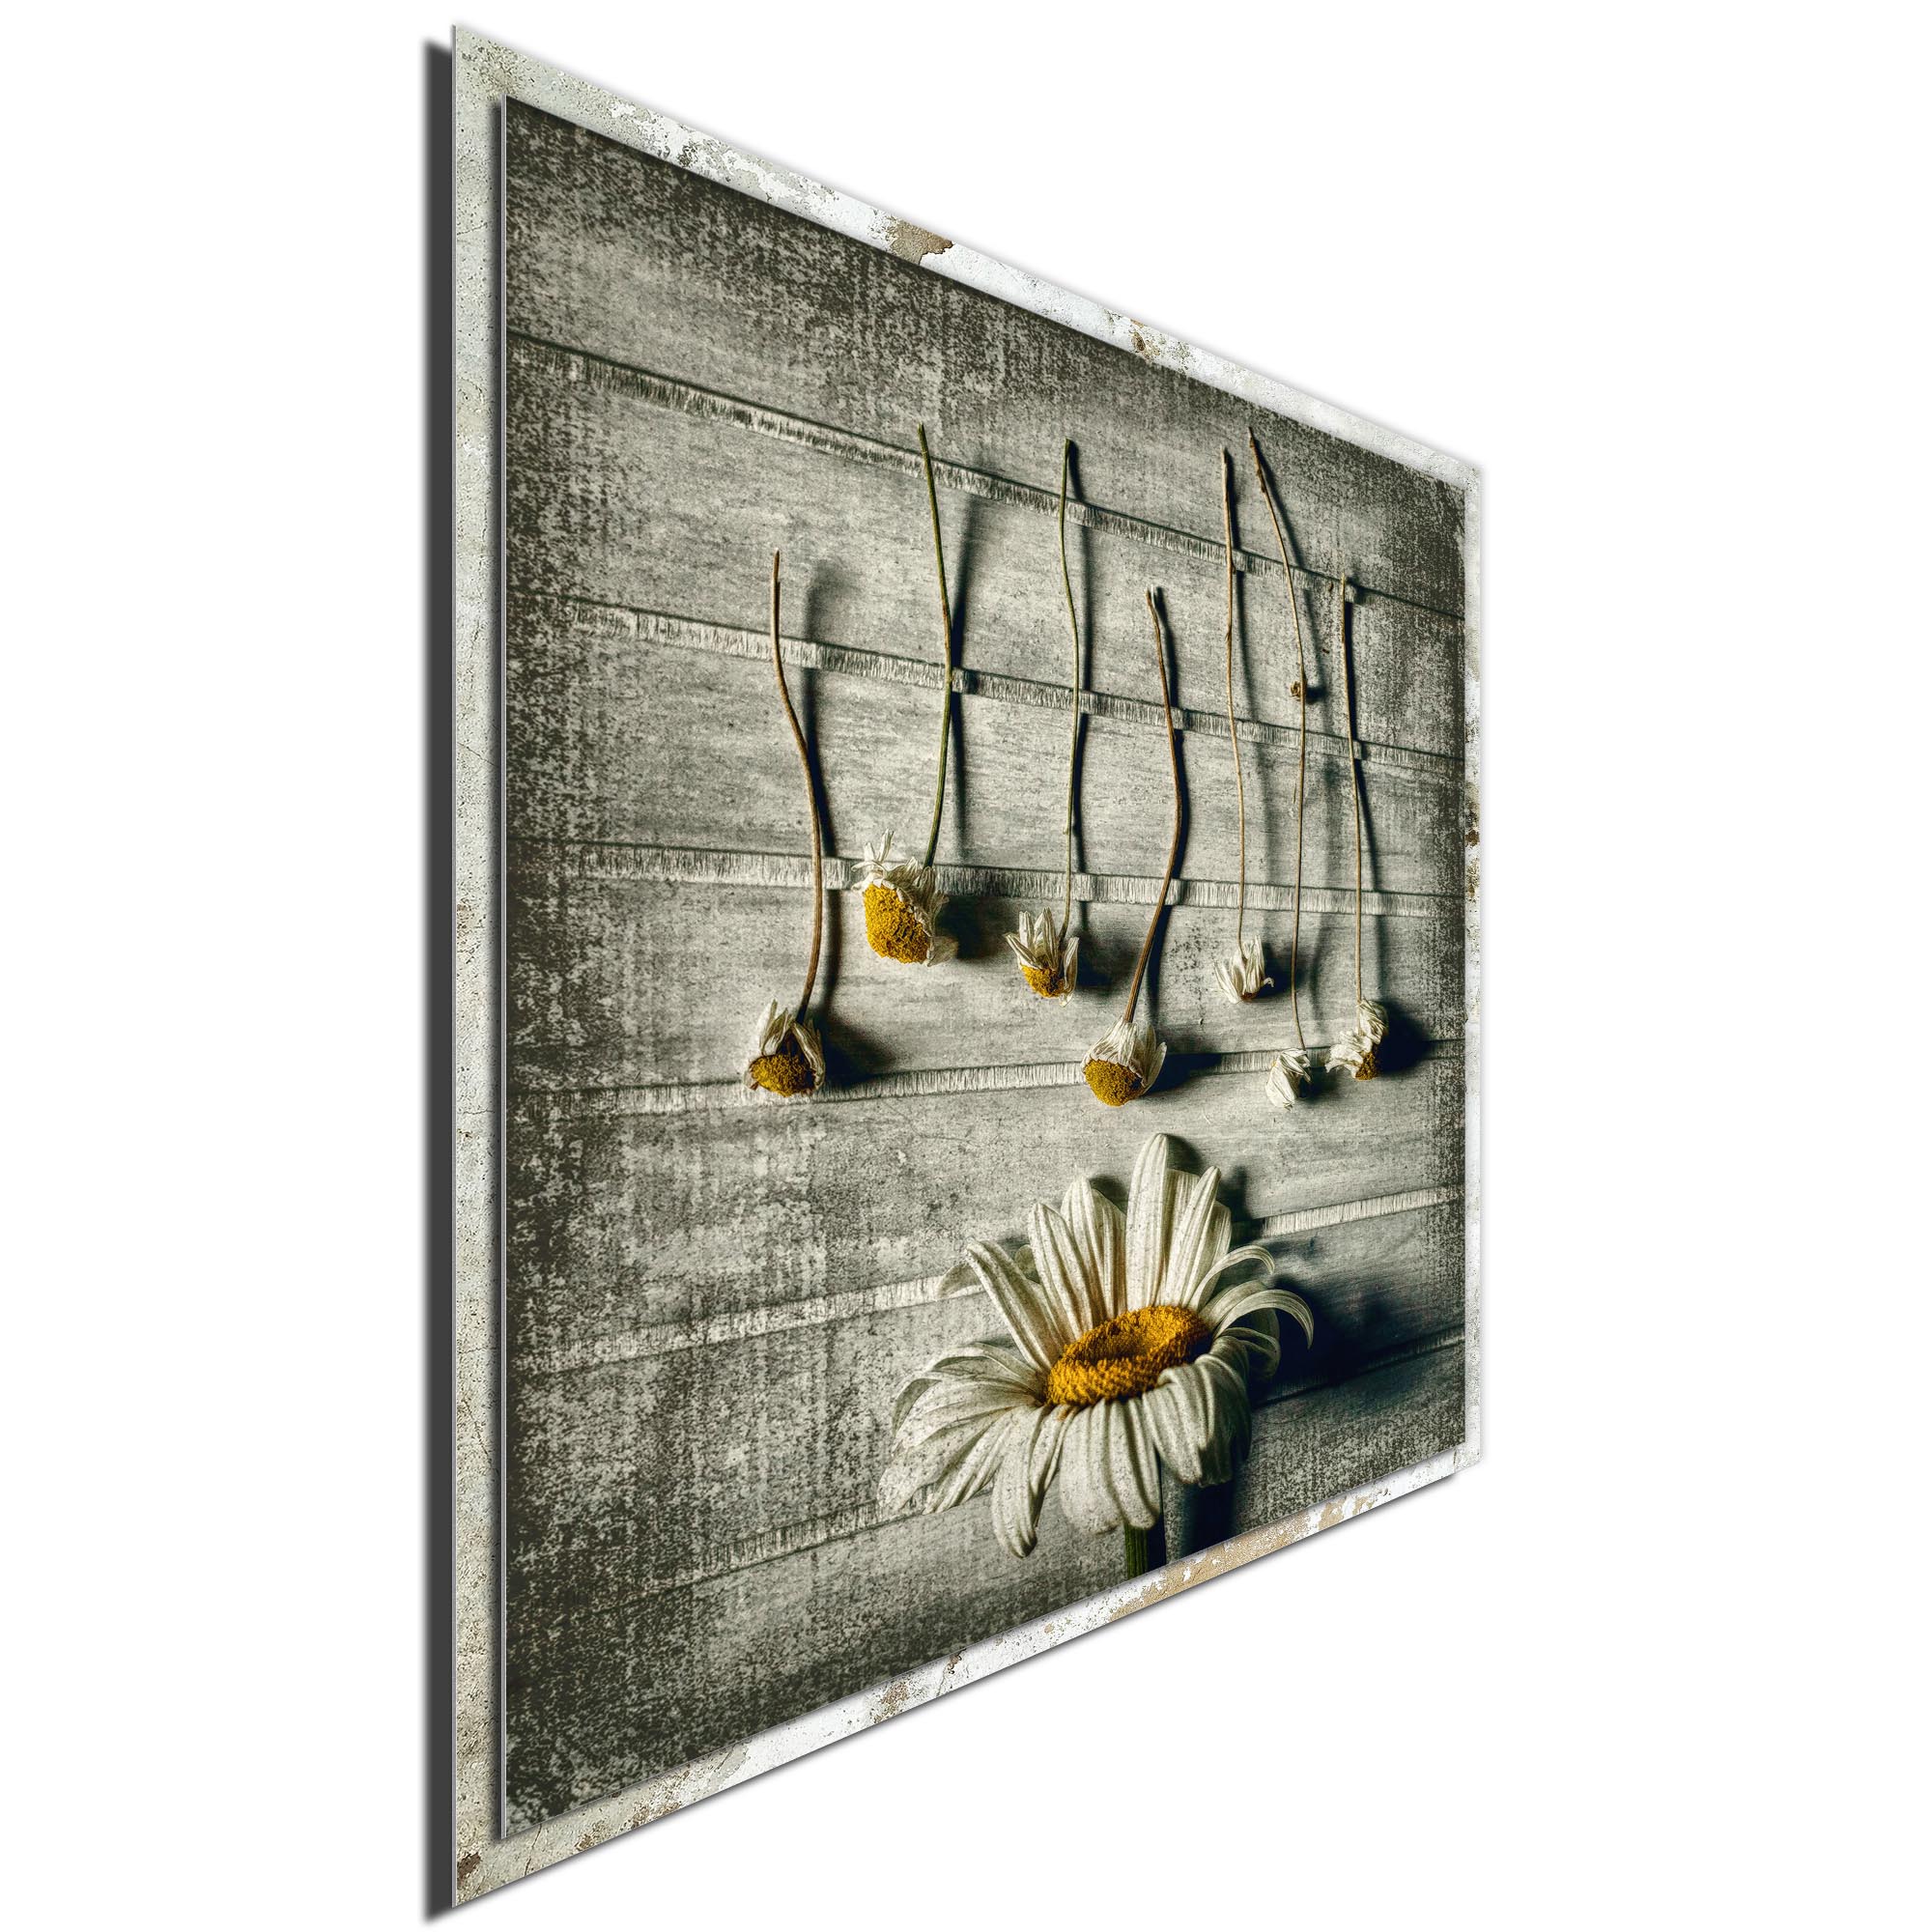 Survival by Evelina Petkova - Modern Farmhouse Floral on Metal - Image 2